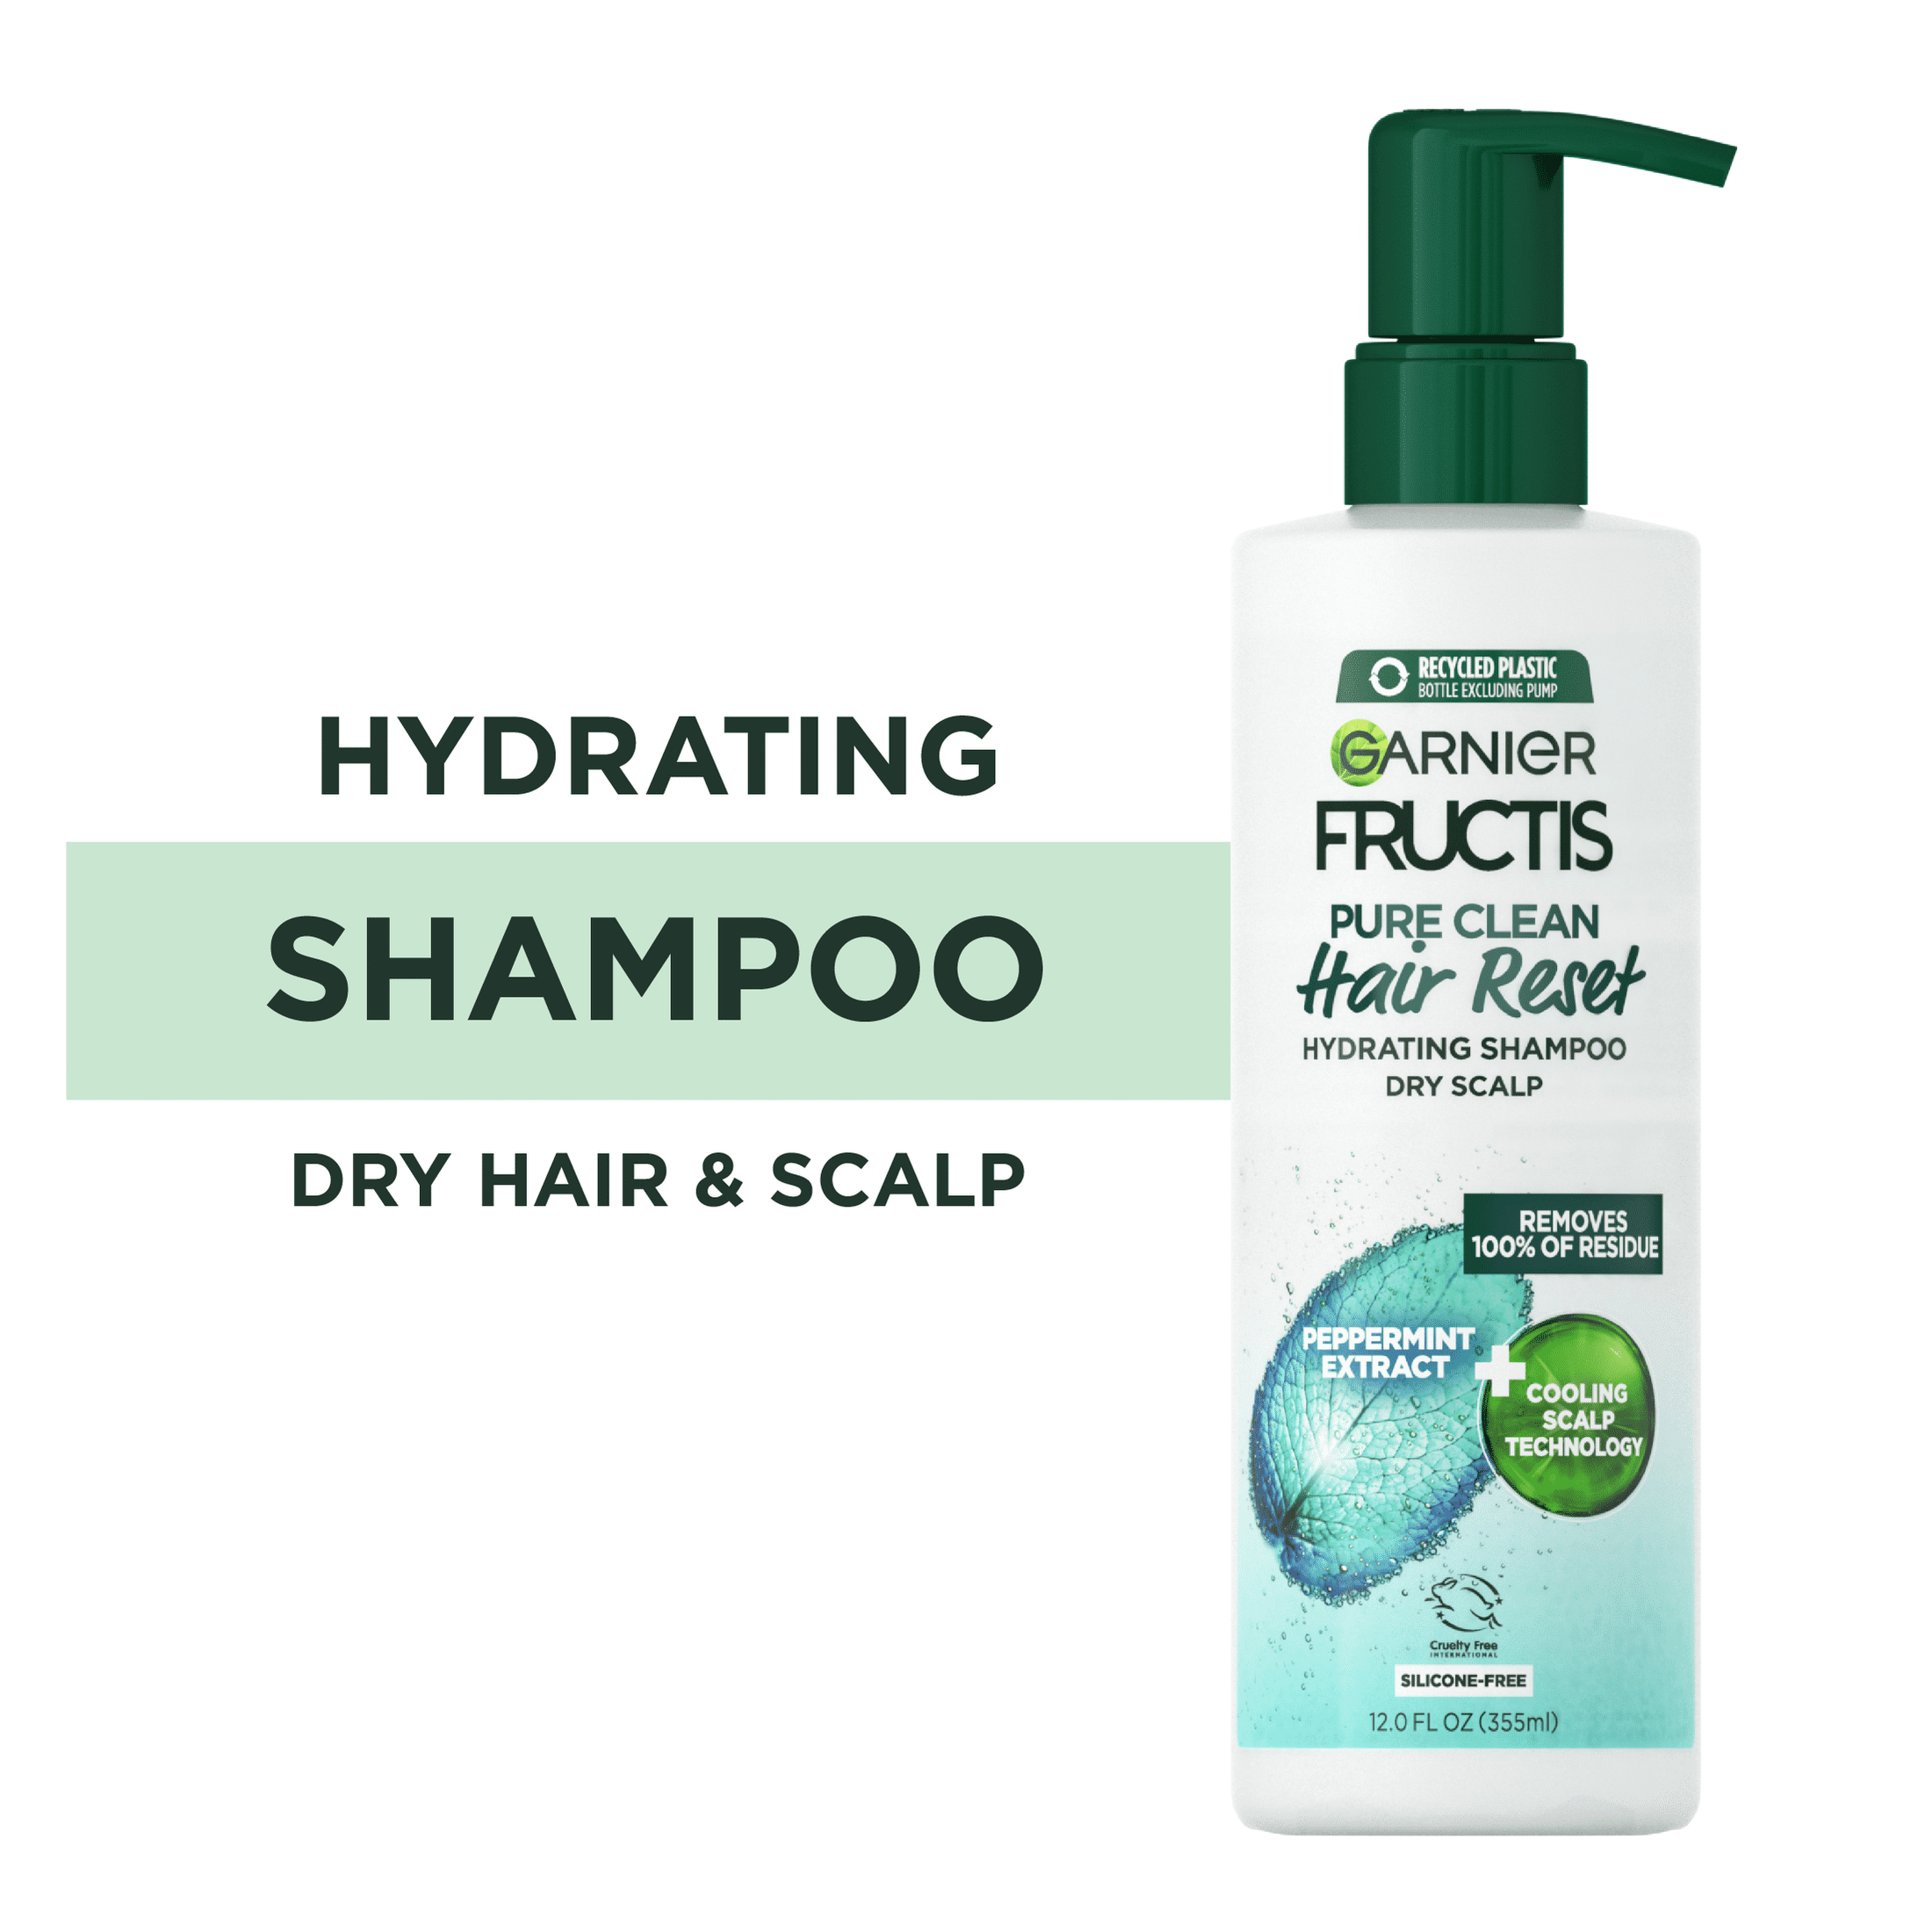 brud Såvel accent Garnier Fructis Pure Clean Hair Reset Hydrating Shampoo with Peppermint  Extract, 12 fl oz - Walmart.com